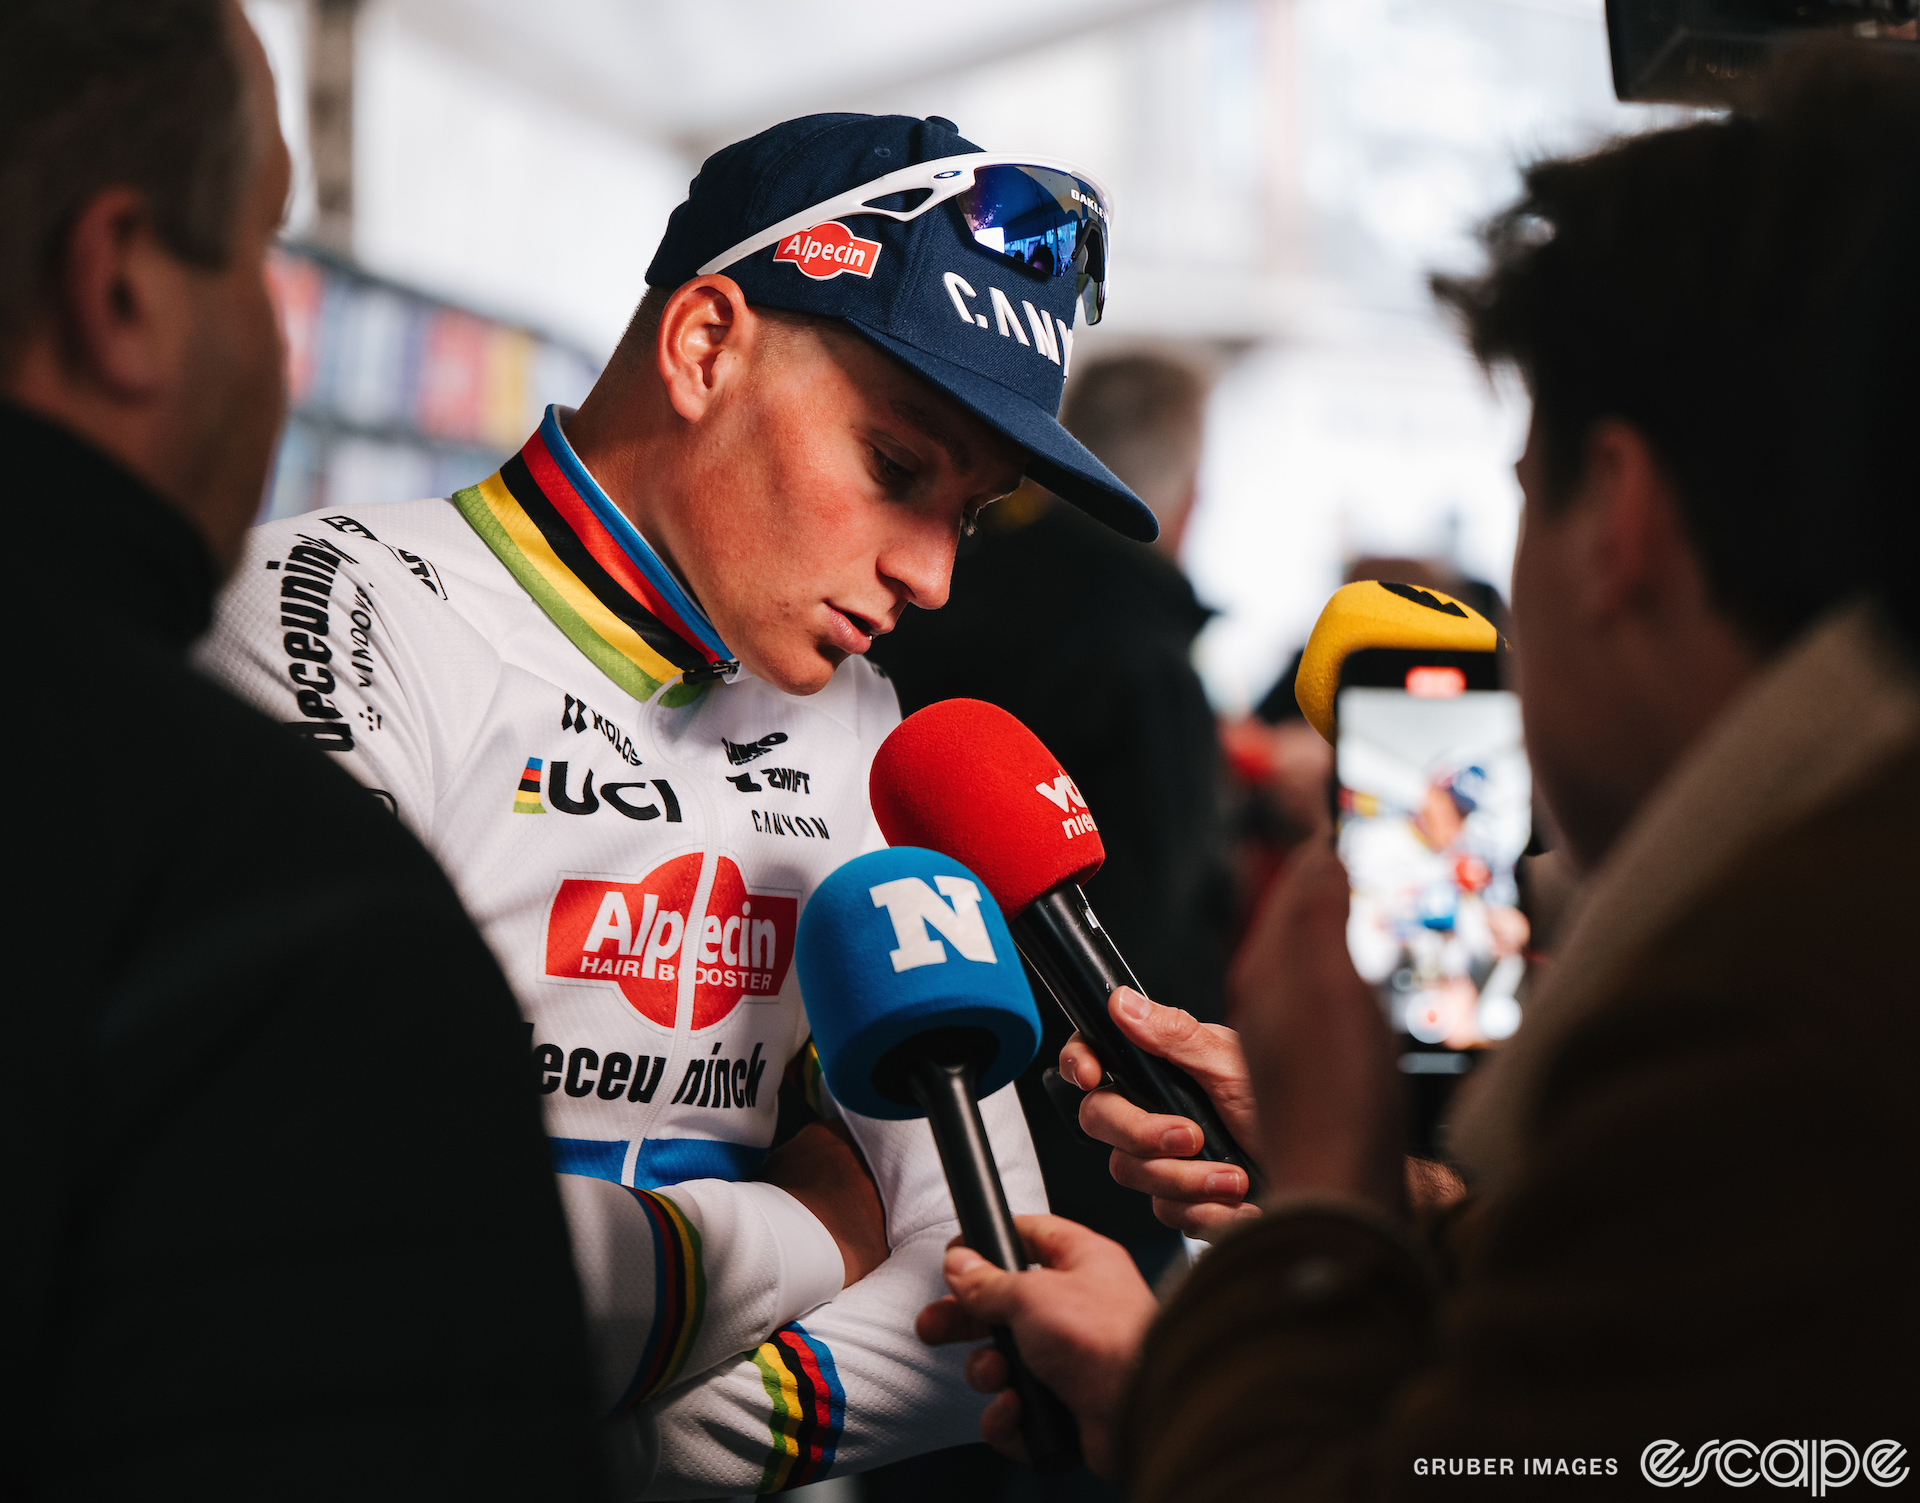 Mathieu van der Poel bows his head slightly as he speaks into two proferred reporters' microphones. He has a look of concentration and his eyes are slightly downcast.